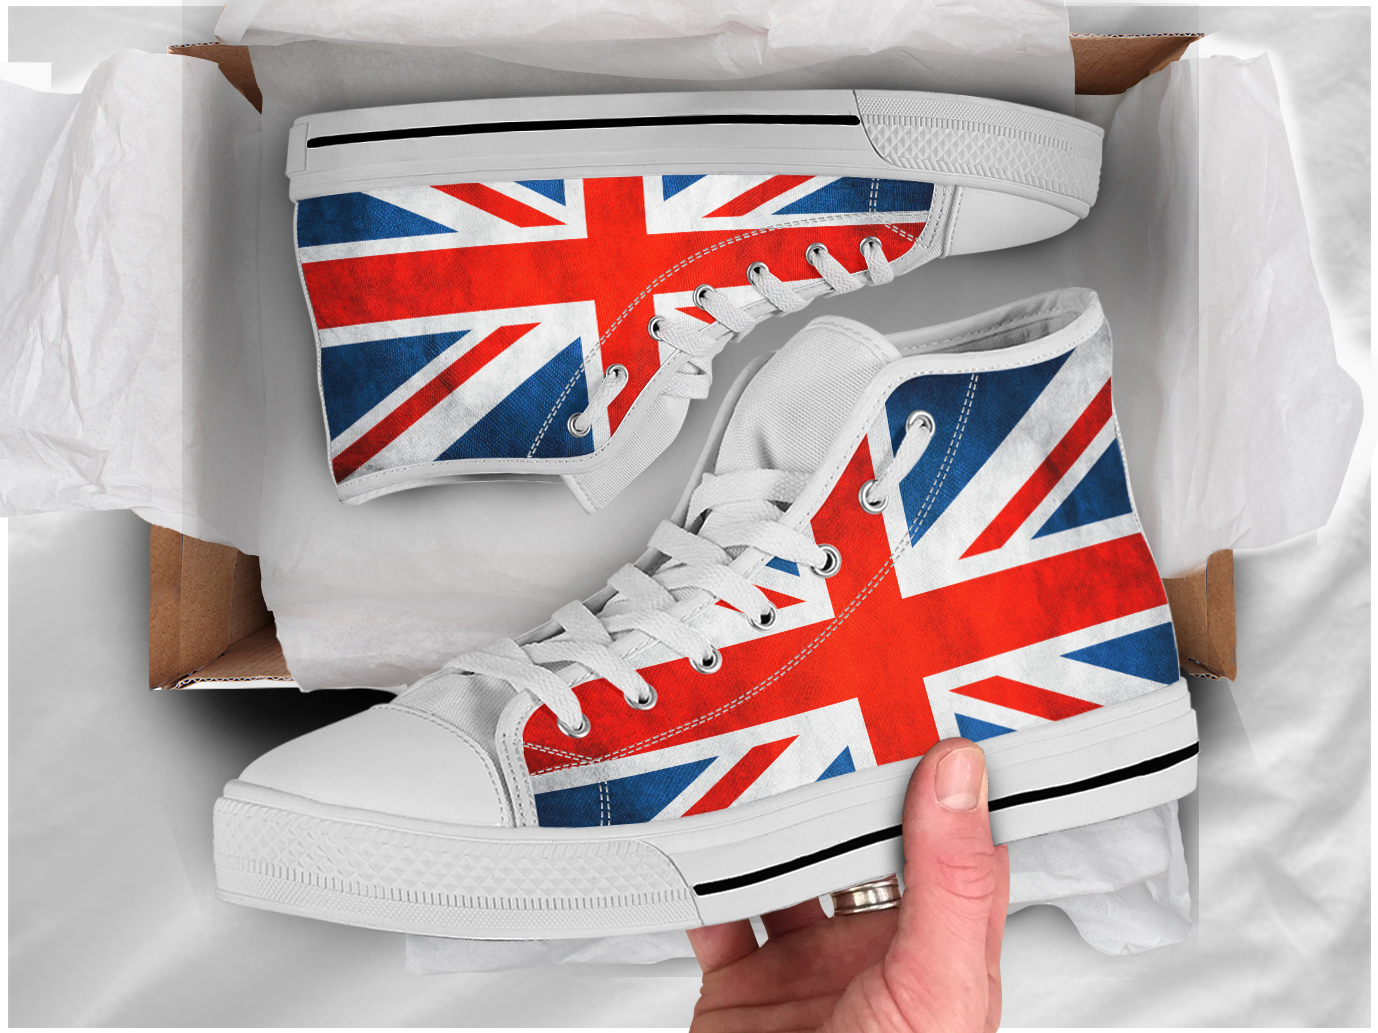 UK Flag Shoes | Custom High Top Sneakers For Kids & Adults